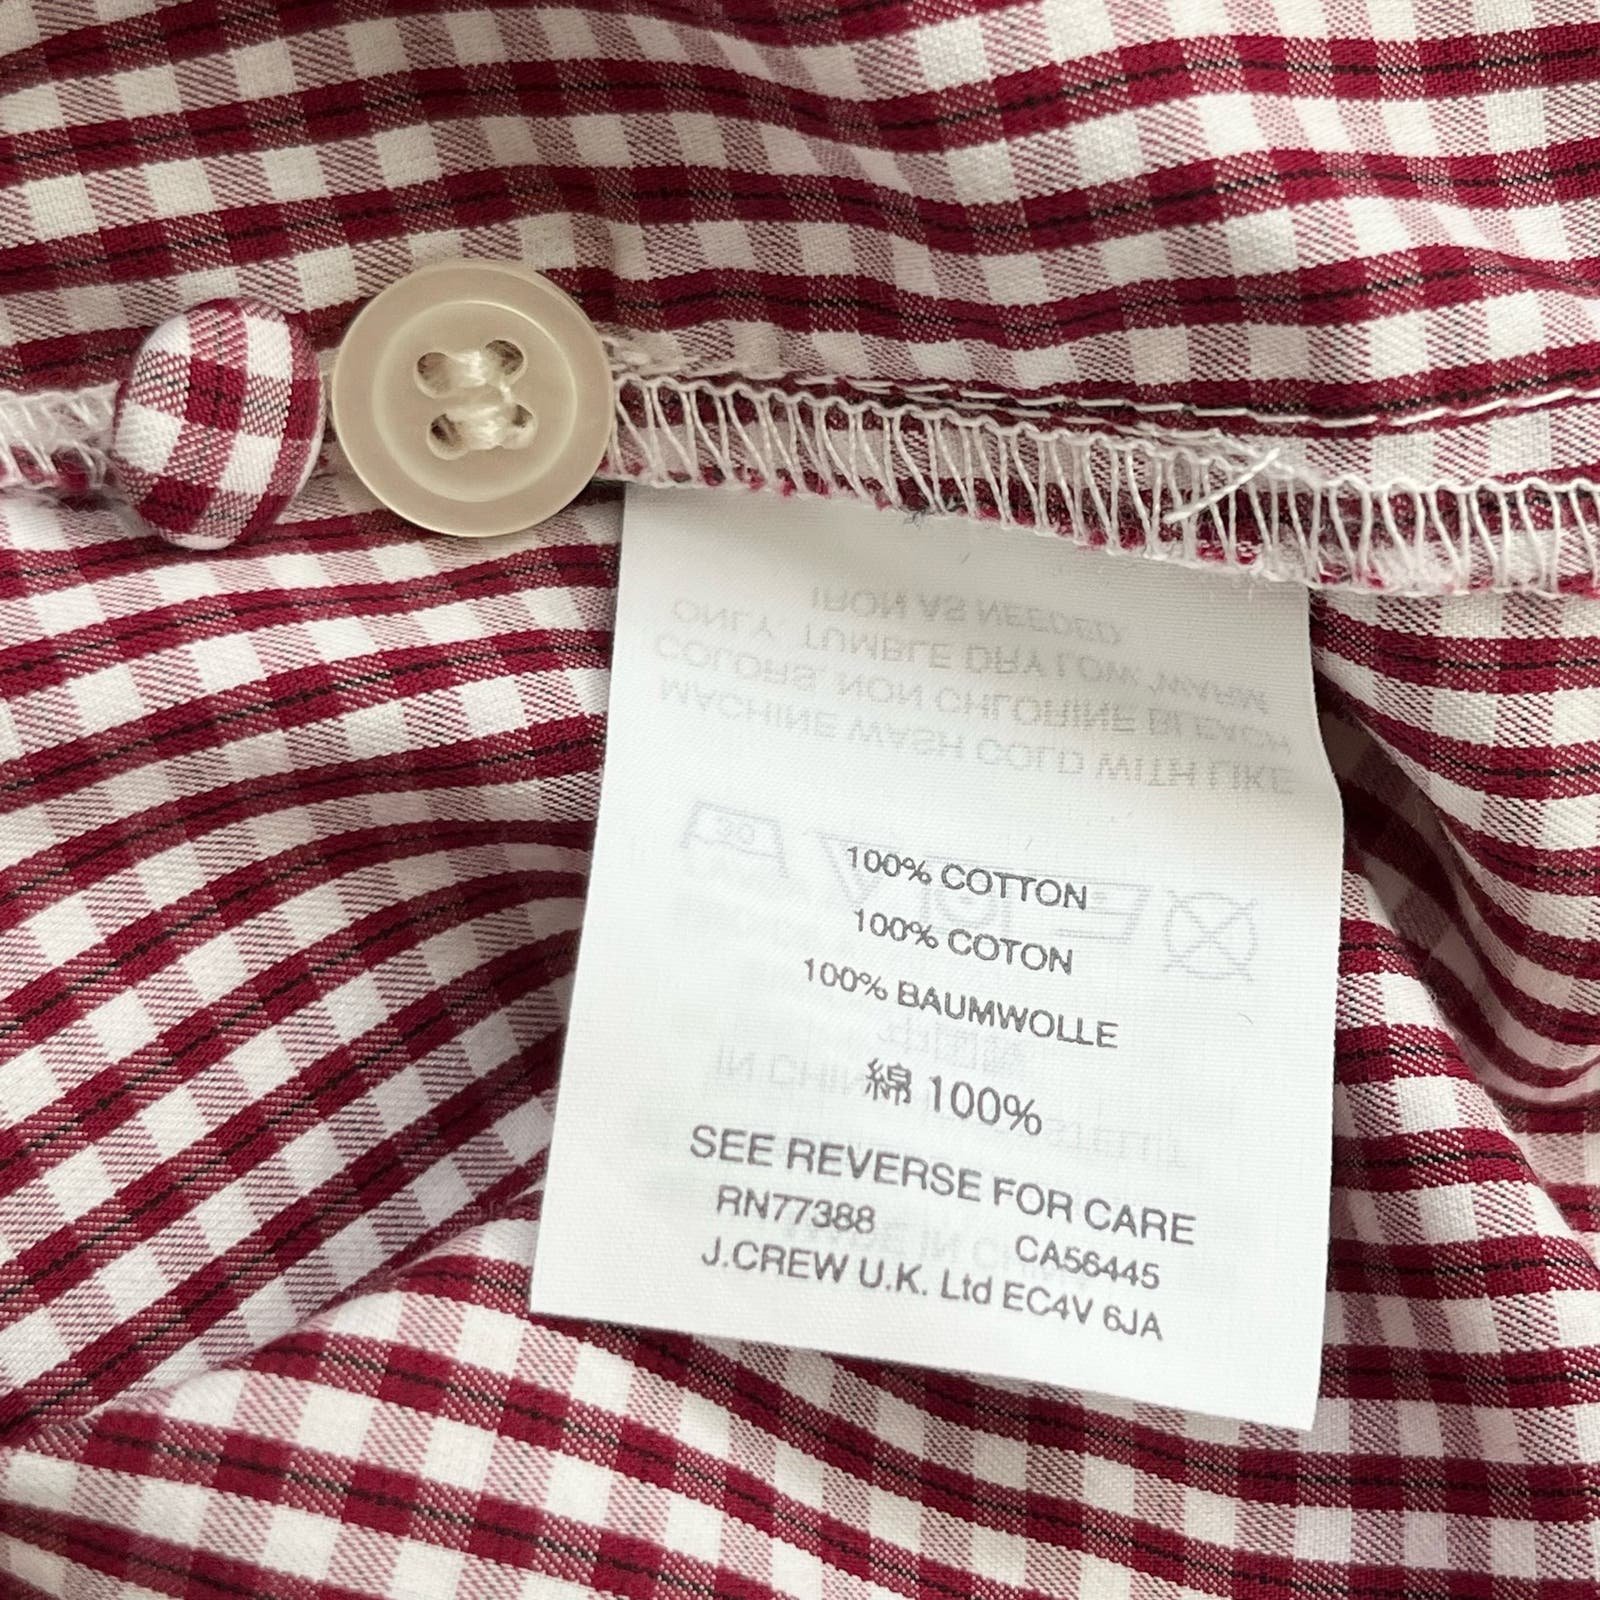 Affordable NWOT Madewell Tie-Waist 3/4 Sleeve Wrap Top in Gingham Check Red & White, Medium jgF66uQgB online store